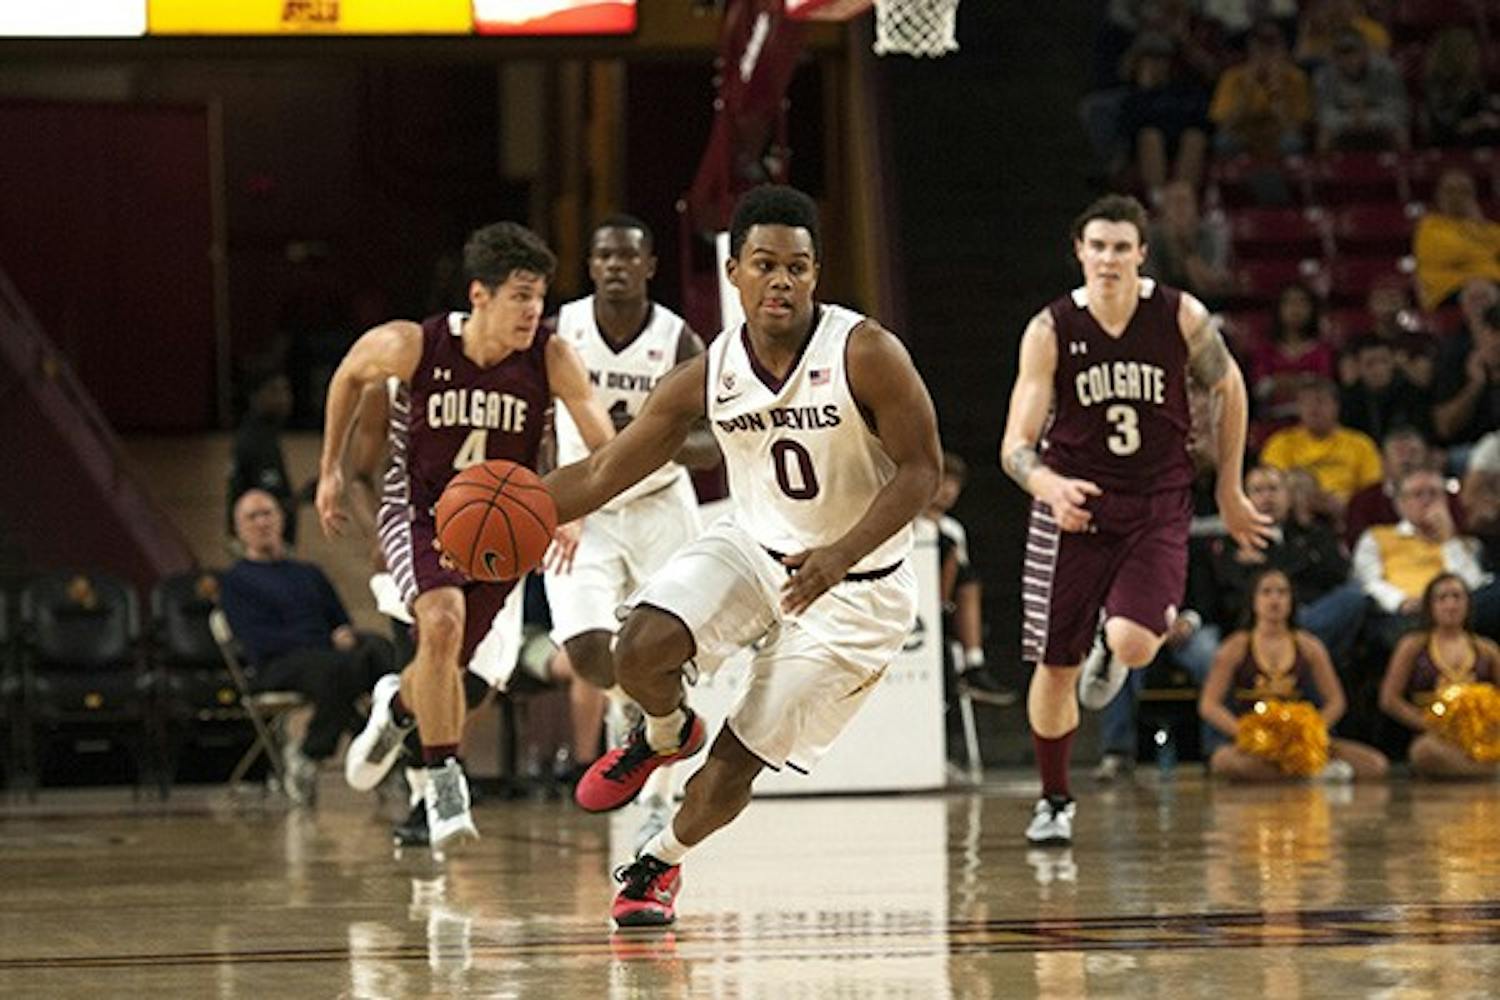 Freshman guard Tra Holder dashes down court after Colgate opposition losses possession. ASU narrowly defeated Colgate, 78-71, at Wells Fargo Arena on Saturday, Nov. 29, 2014. (Photo by Mario Mendez)